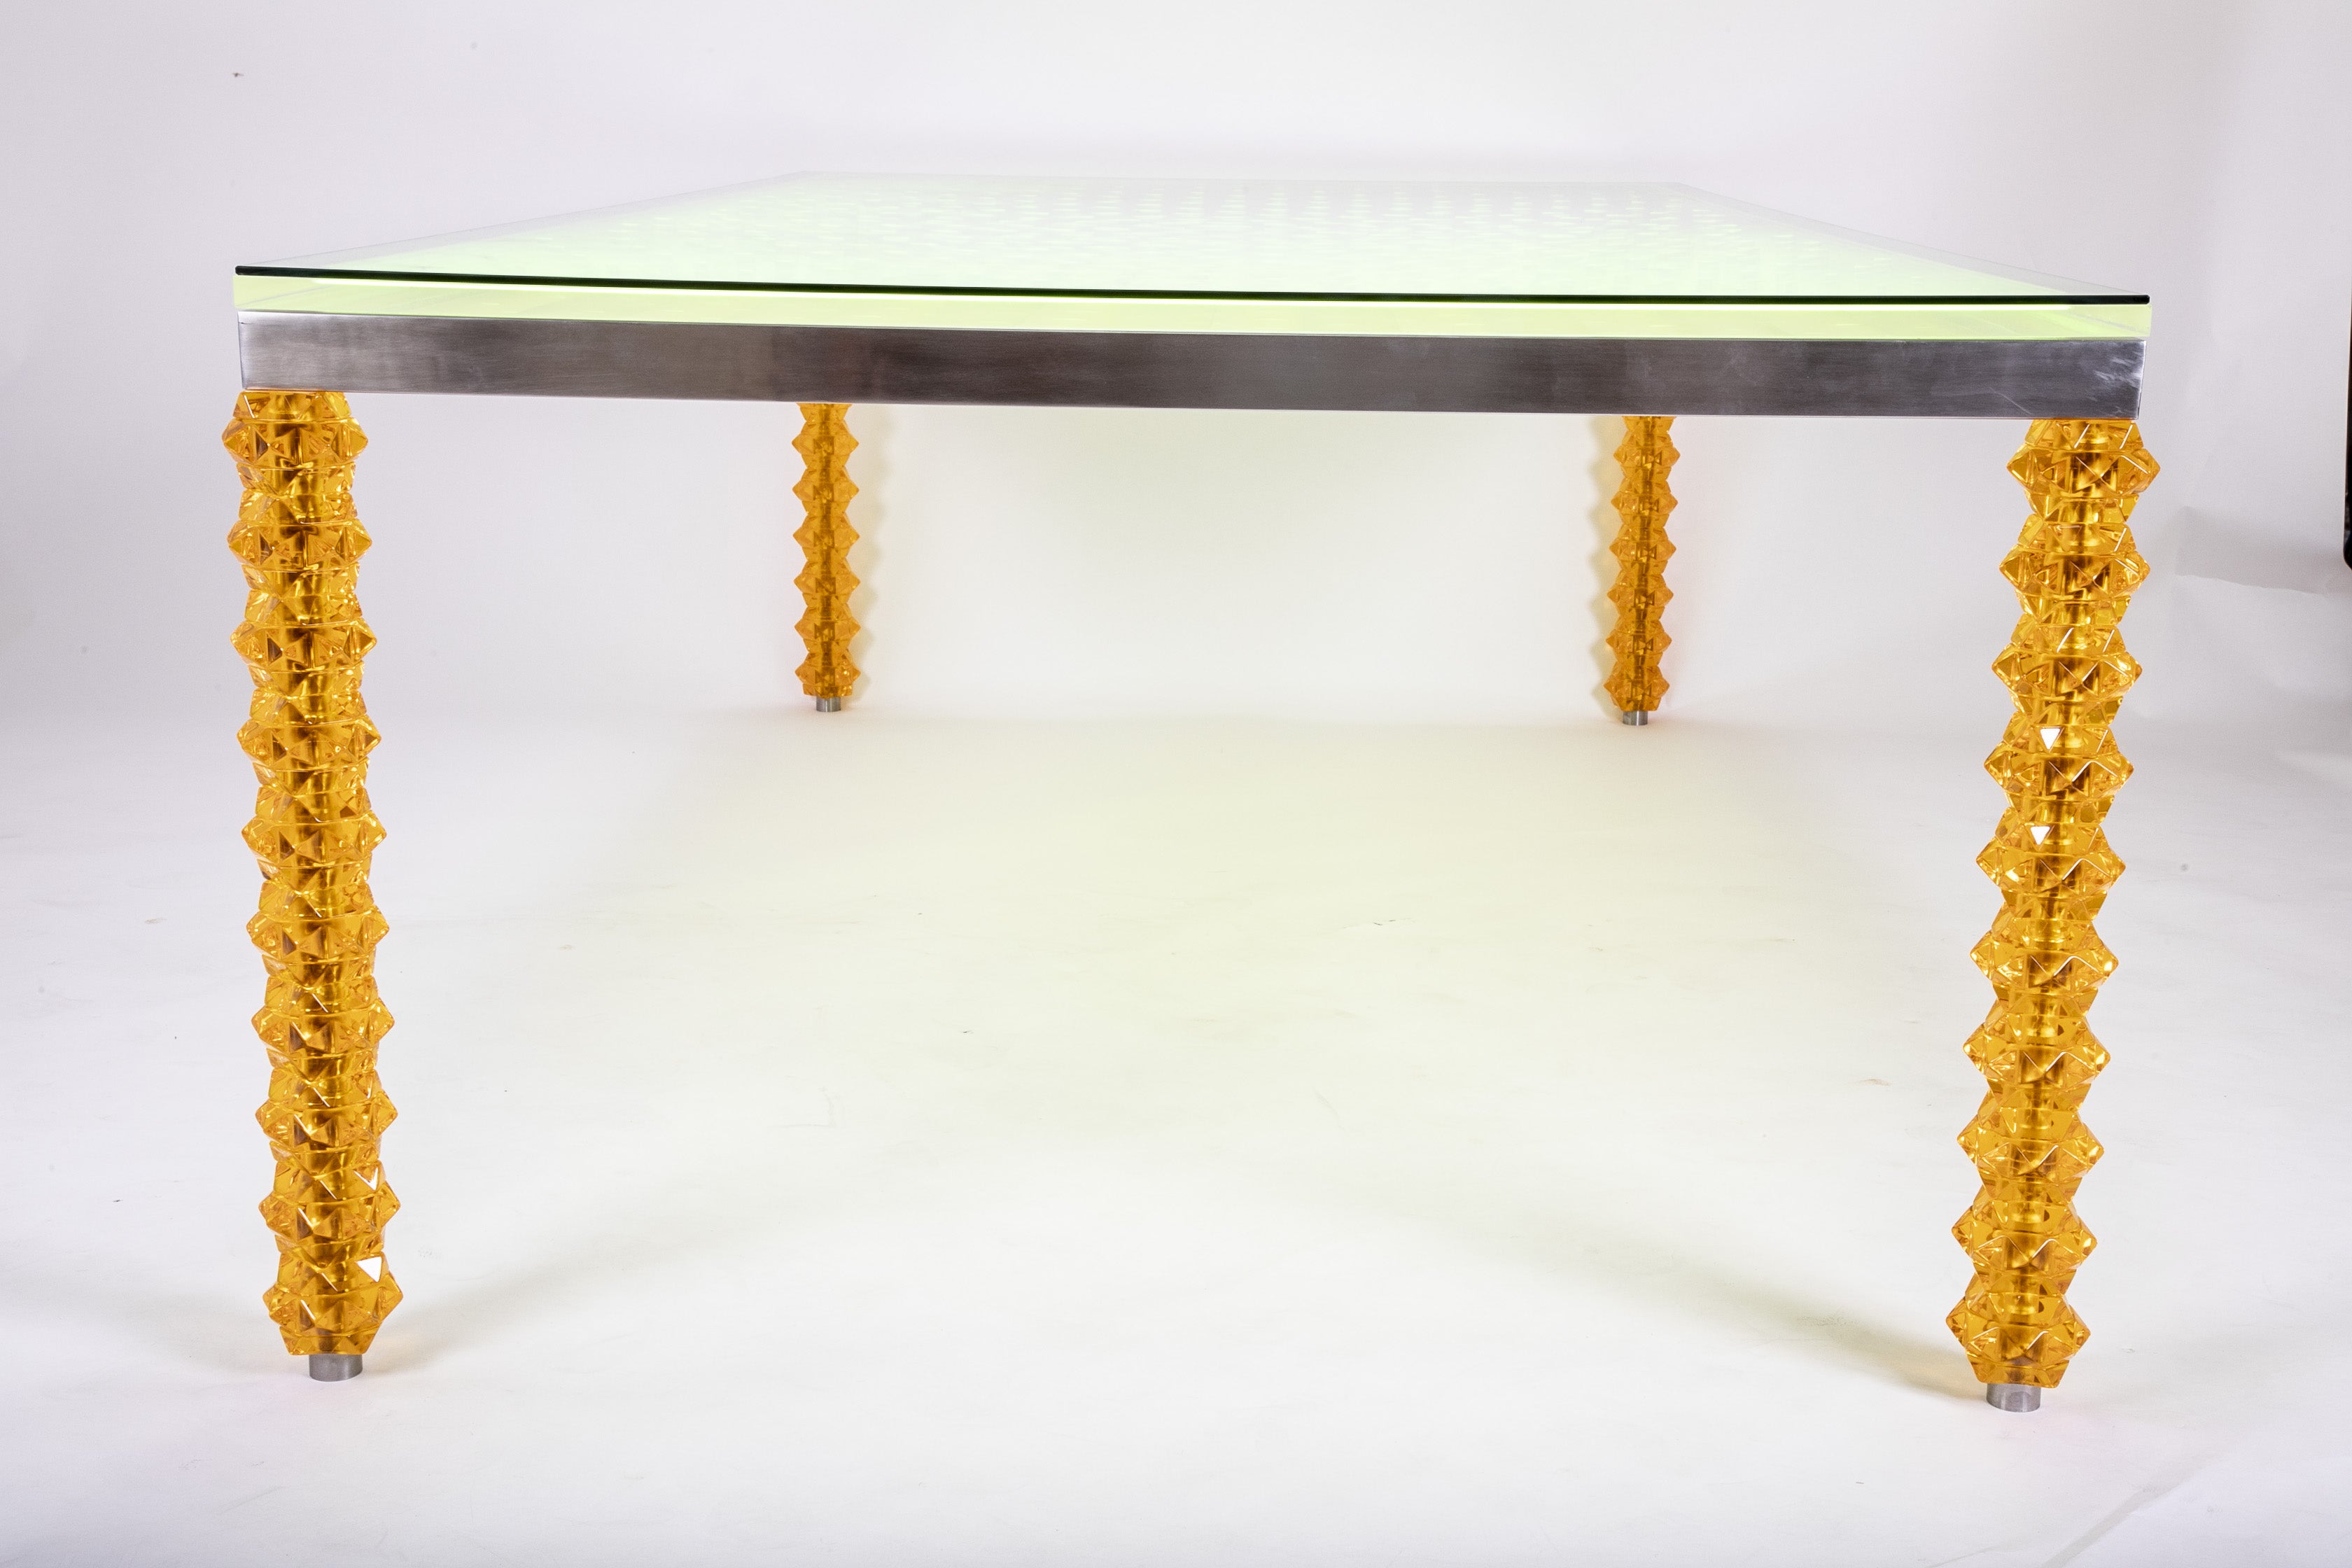 Dining Table Designed by Sawaya & Moroni in Stainless Steel and Lucite